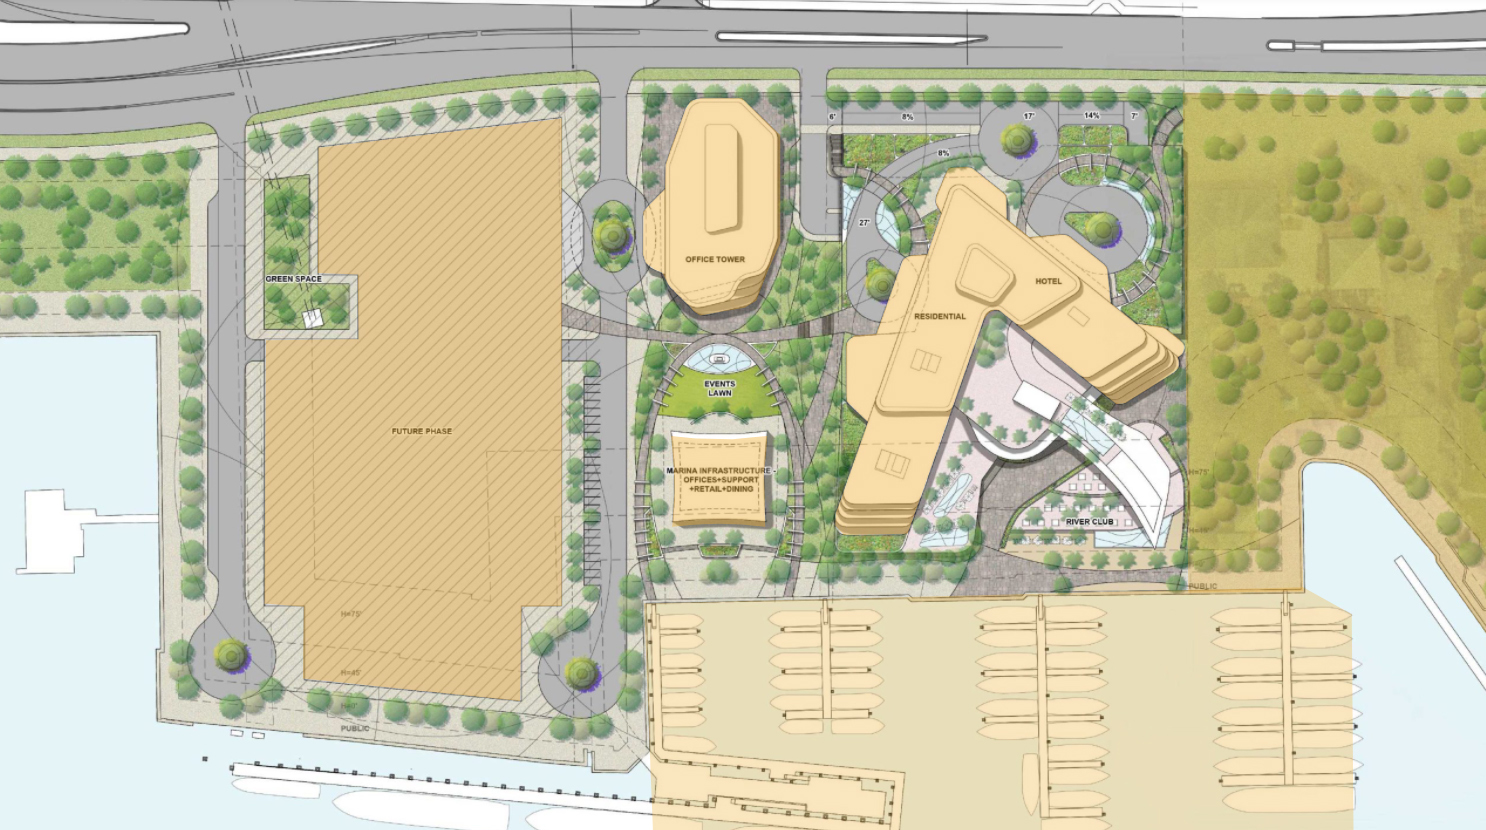 A map of the Shipyards development shows the second phase of the development to the west of the first phase.